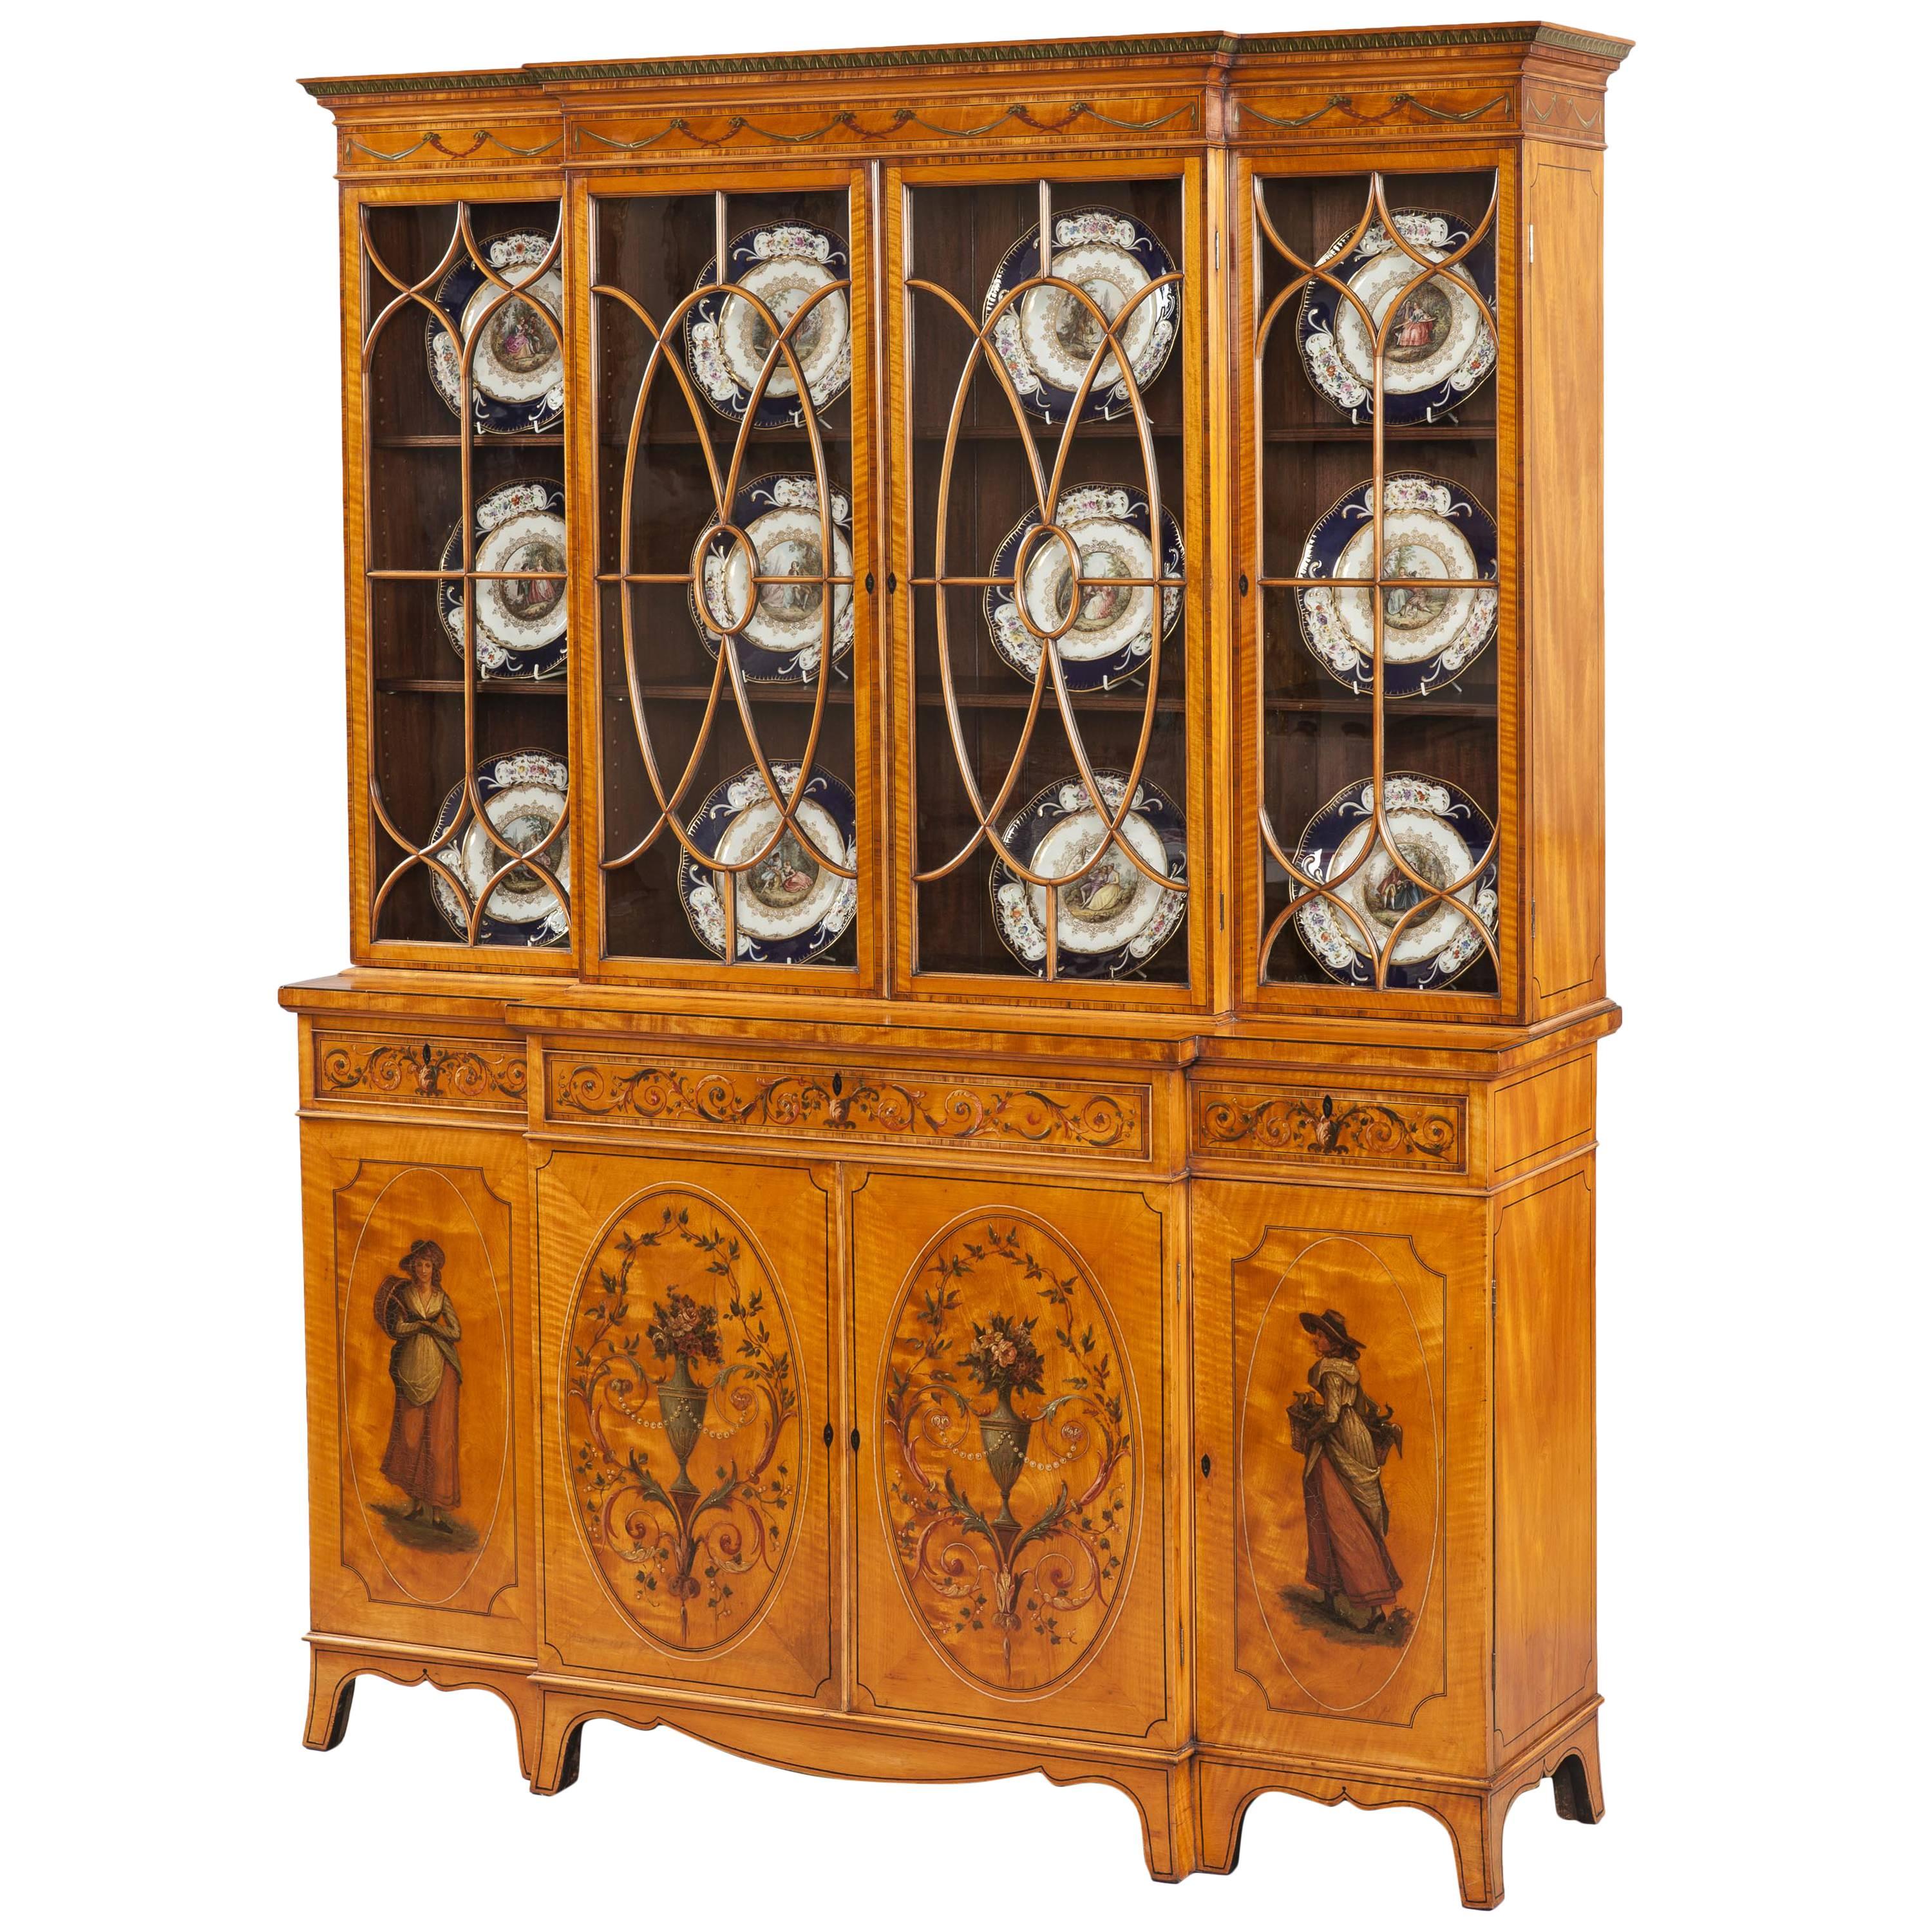 English Satinwood Library Bookcase with Neoclassical Decoration